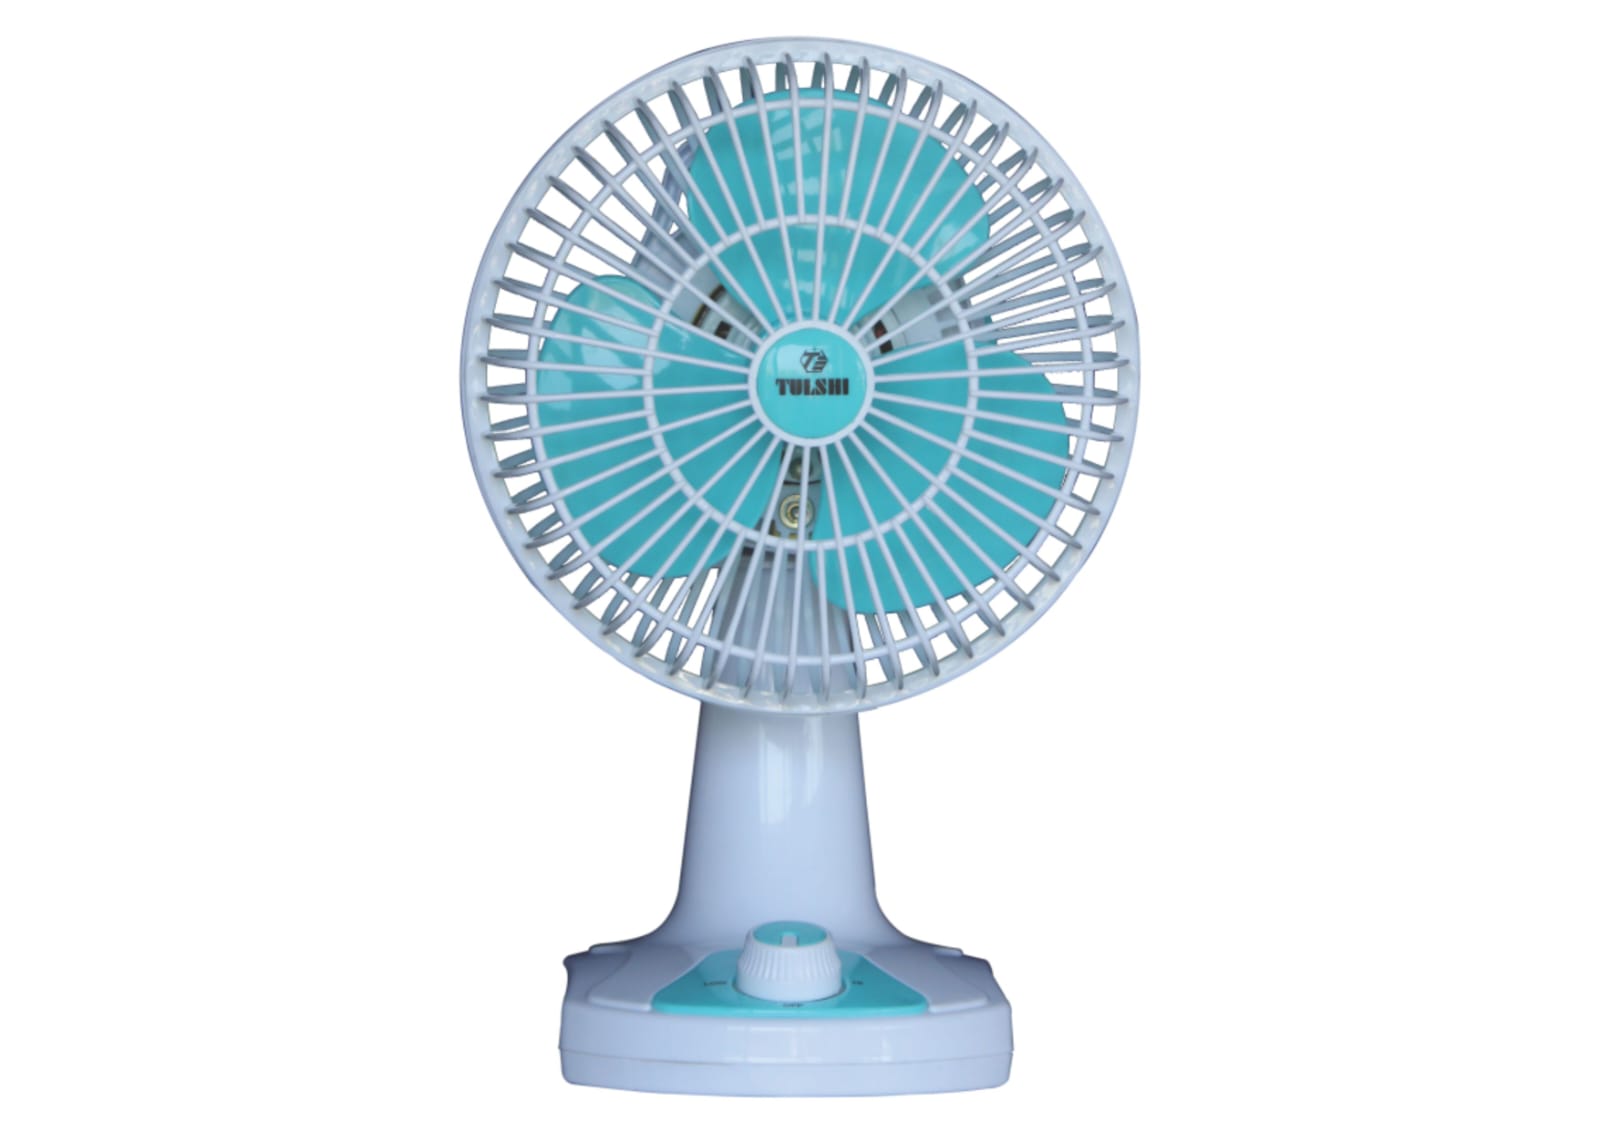 https://tulshielectronics.com/storage/images/products/A.P UTILITY FAN 6,9,12.77_643d0f414baaf.jpg